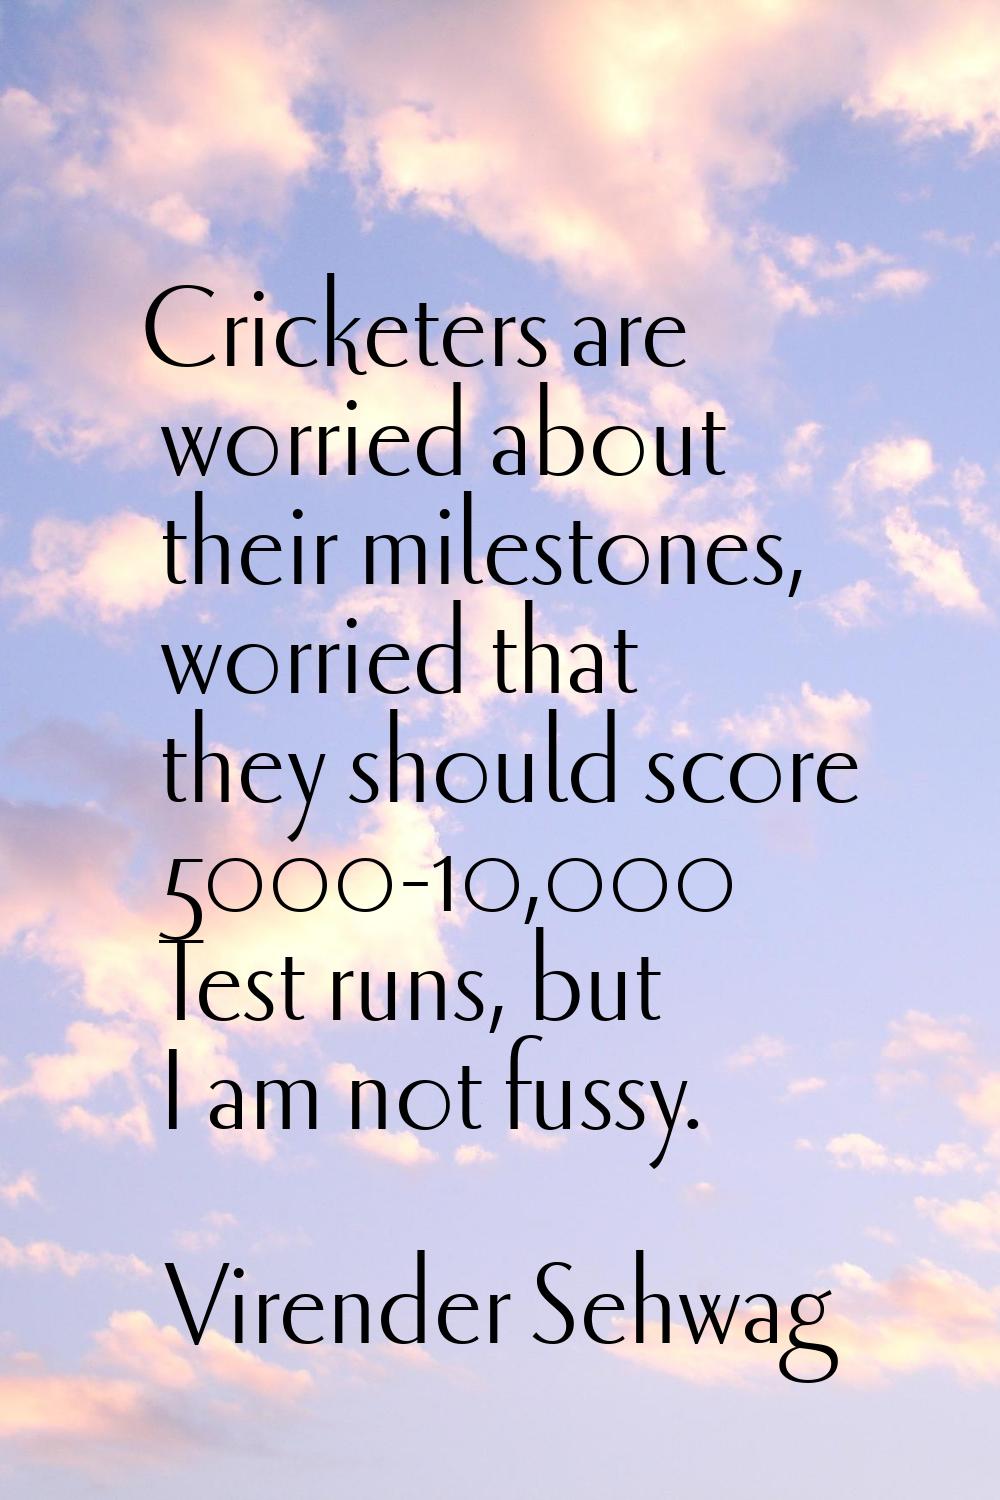 Cricketers are worried about their milestones, worried that they should score 5000-10,000 Test runs